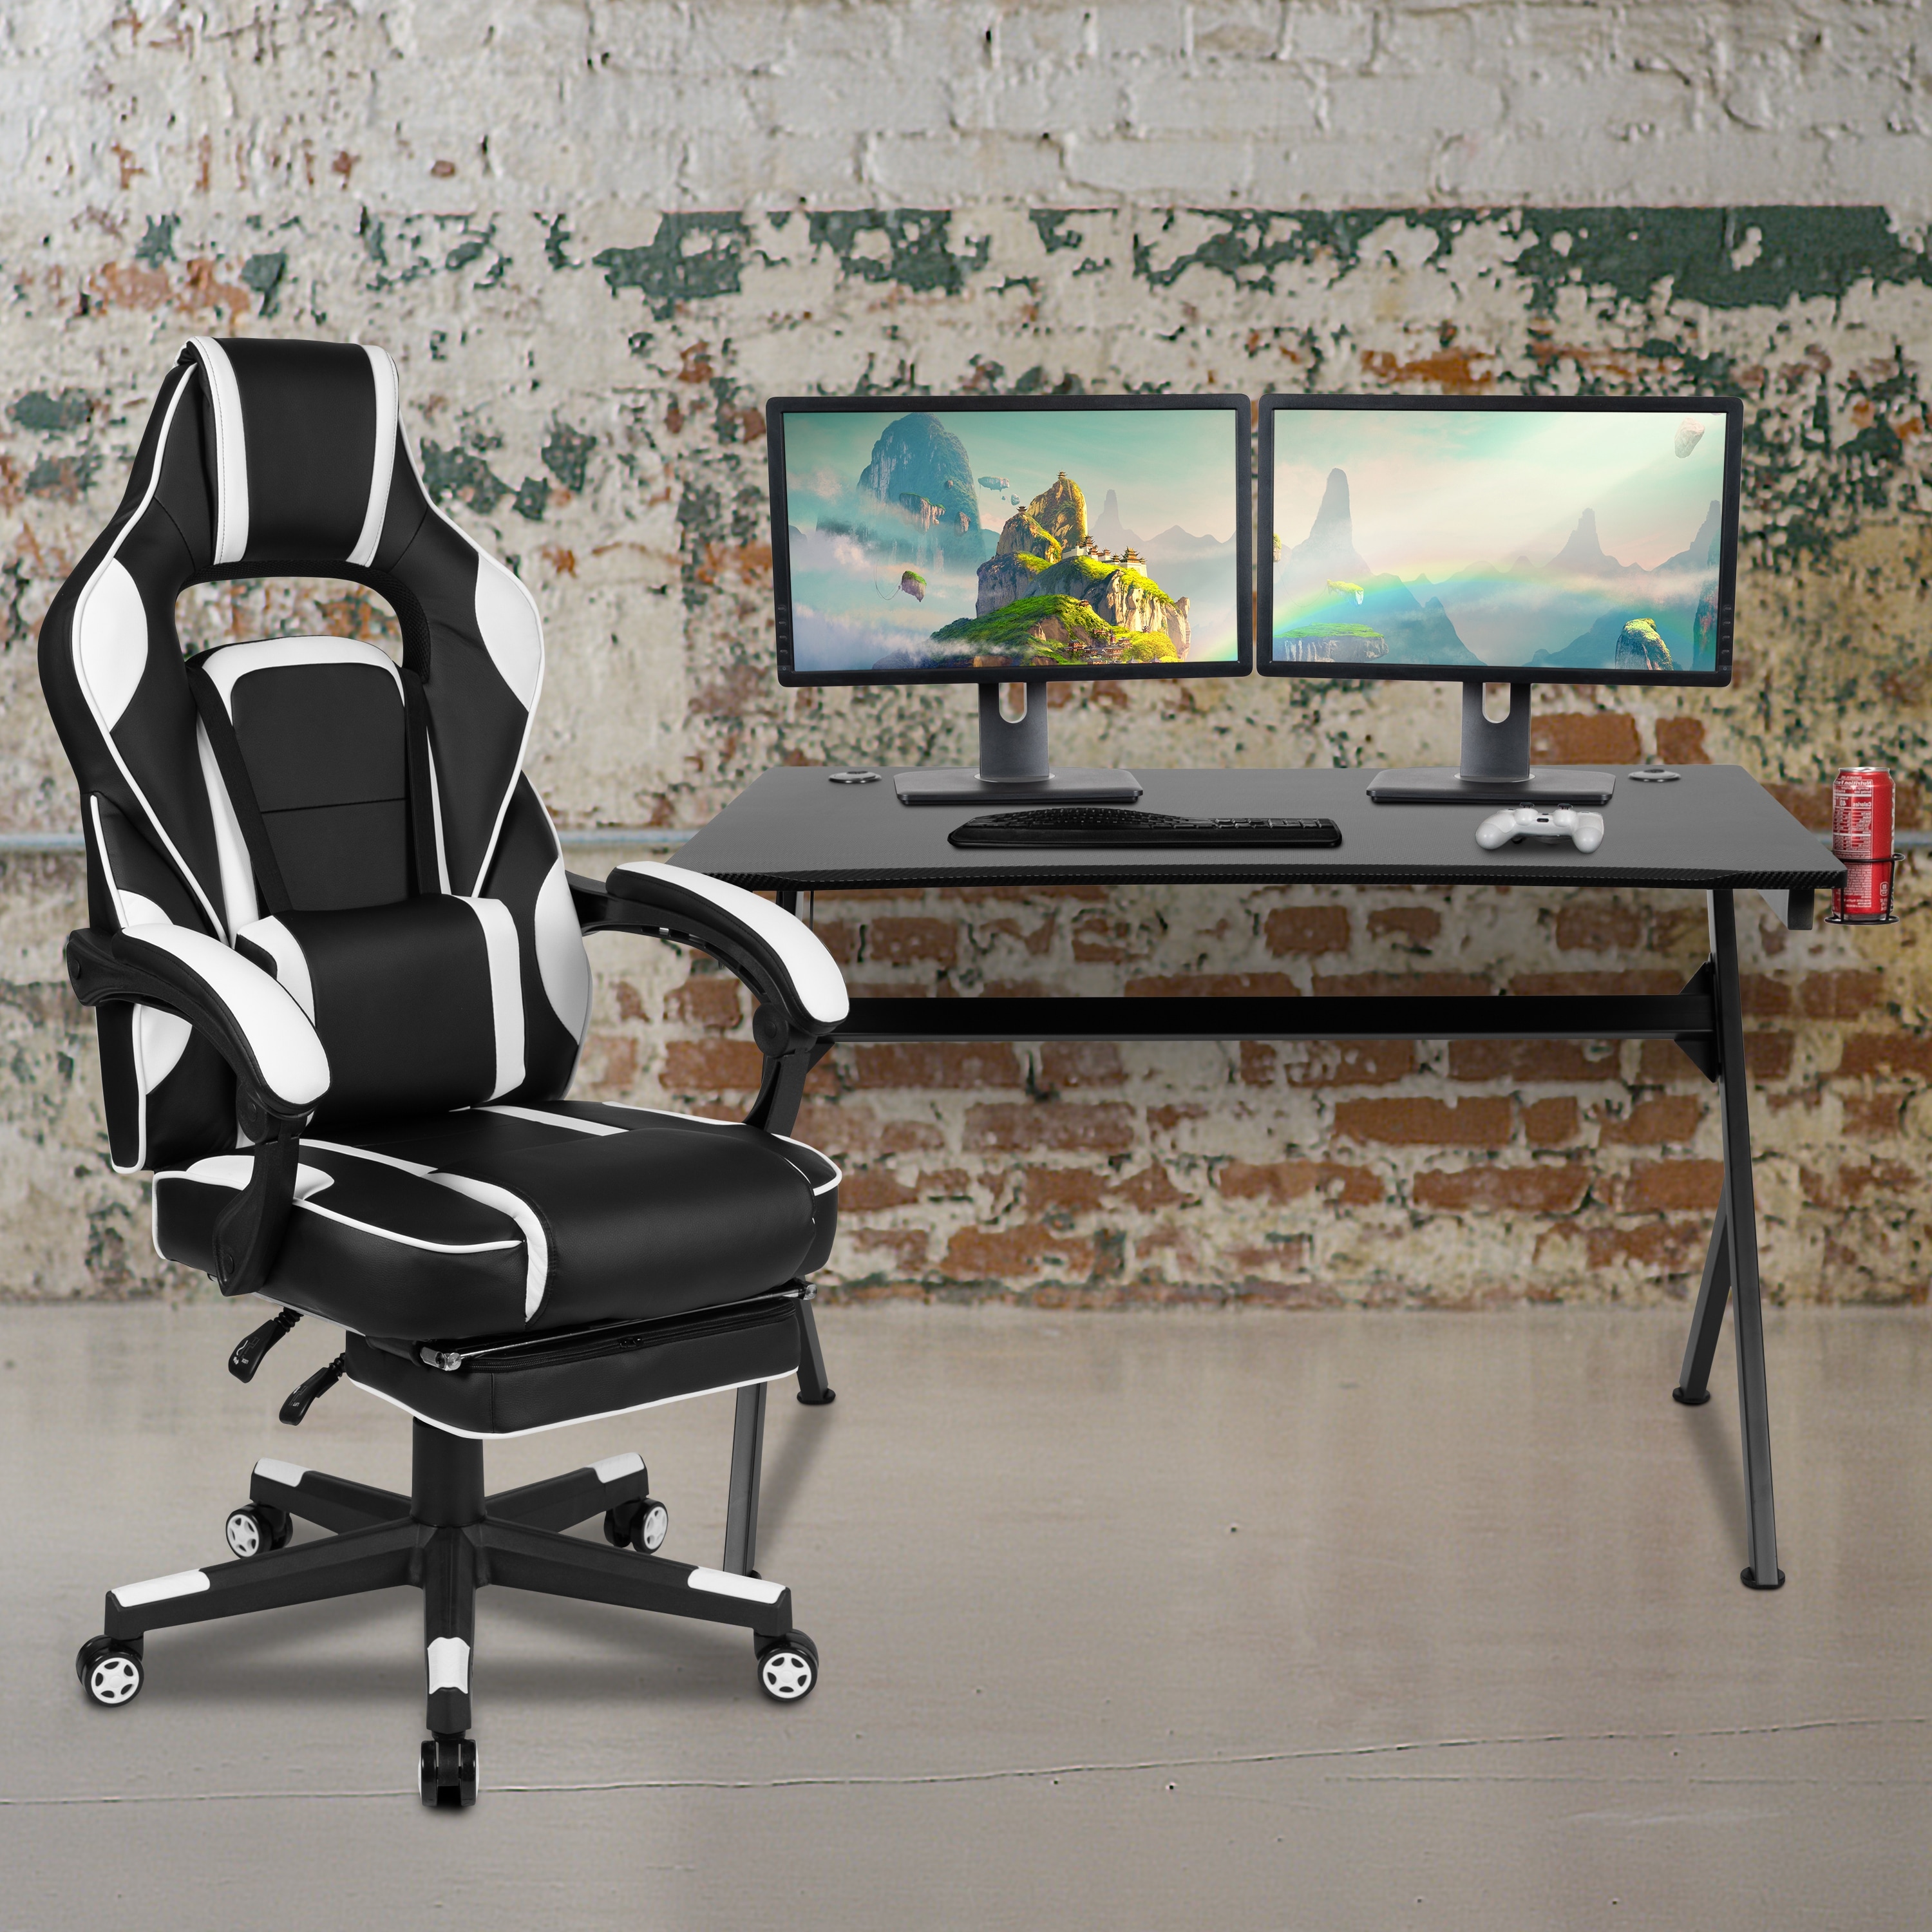 https://ak1.ostkcdn.com/images/products/is/images/direct/8ed7dc1cdd665af49c1c1e39f3c97e283ee53de9/Gaming-Desk-Set---Cup-Headset-Holder-Reclining-%26-Footrest.jpg